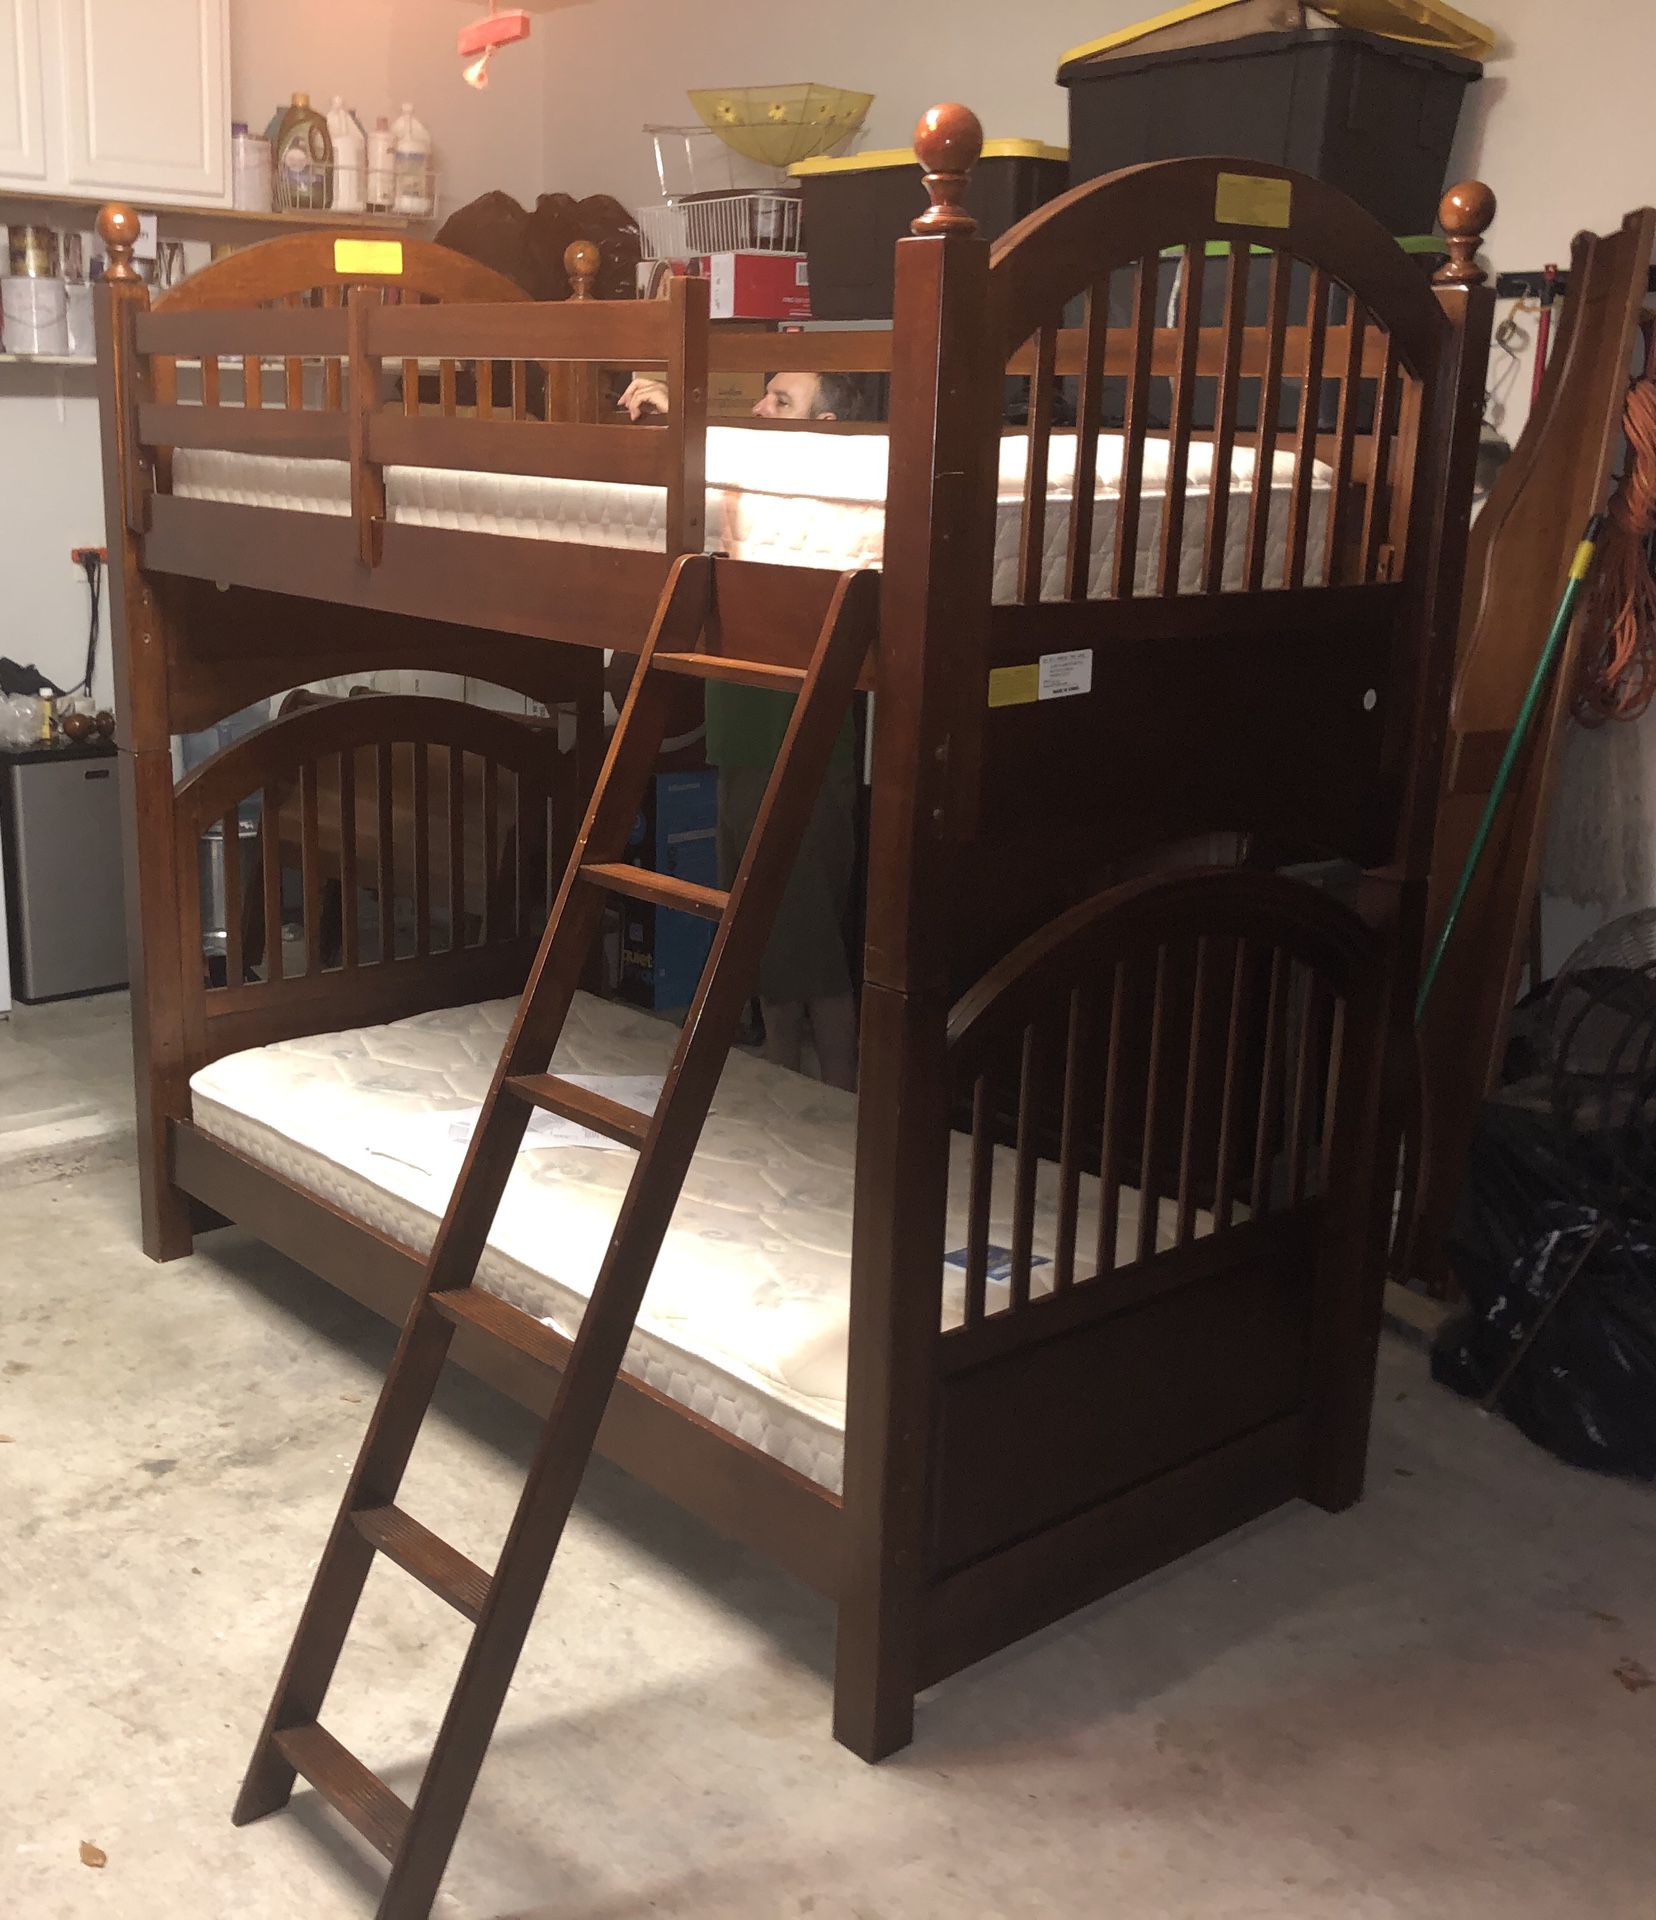 100% Wood Bunk Beds / Twin Beds with mattresses